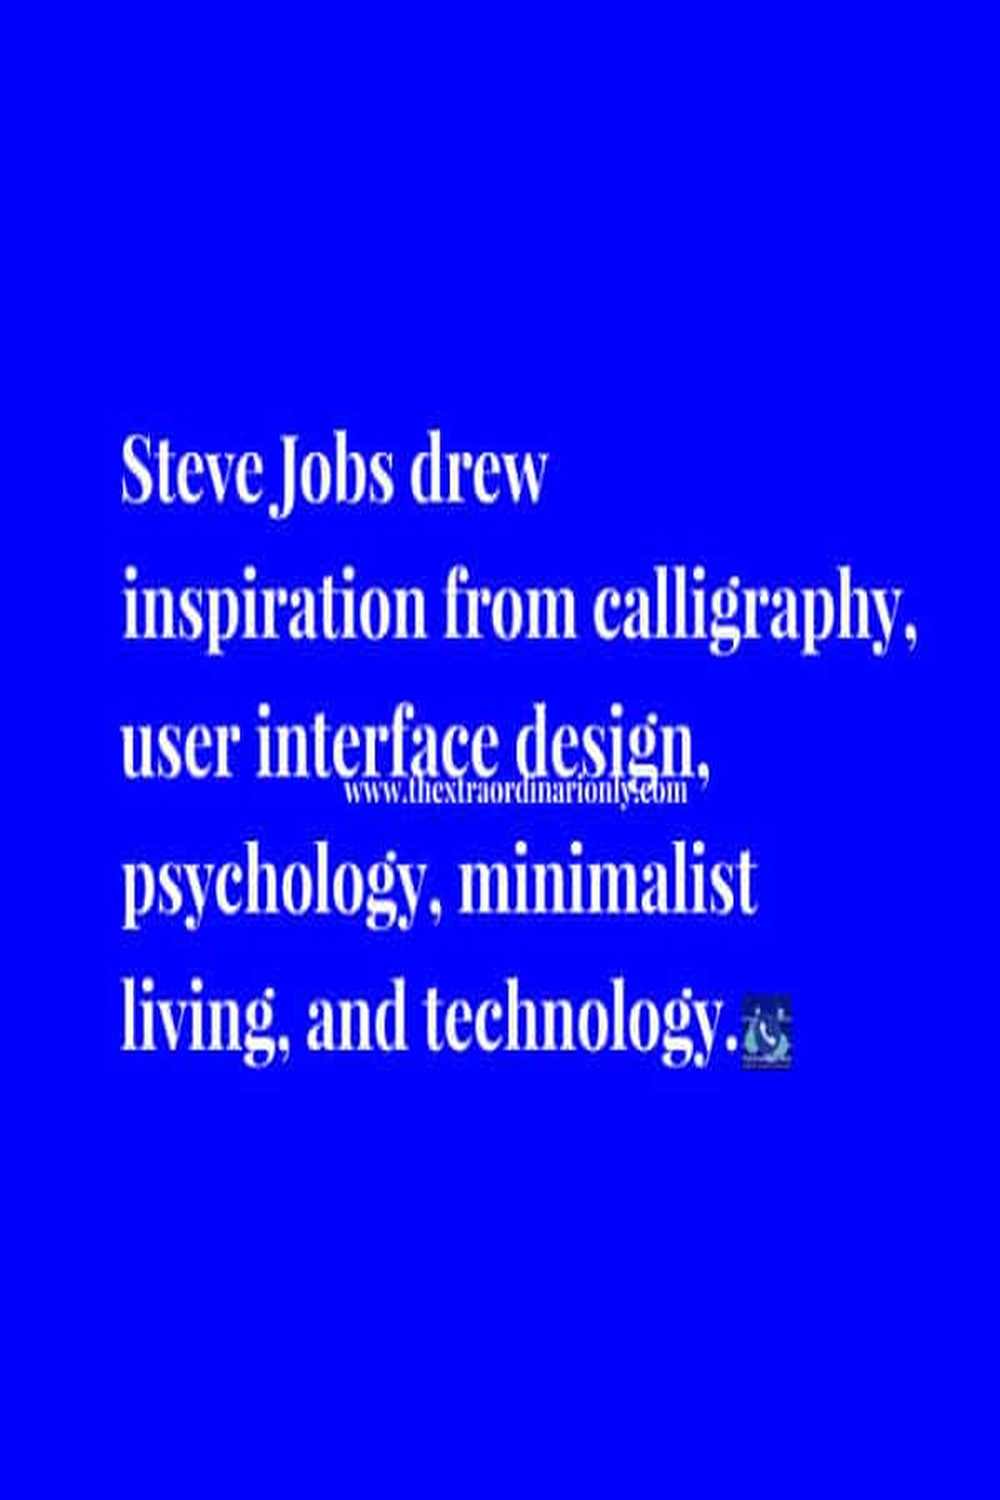 thextraodinarionly multipassionate inspiration of Steve Jobs trigger successful strategy formulation for business